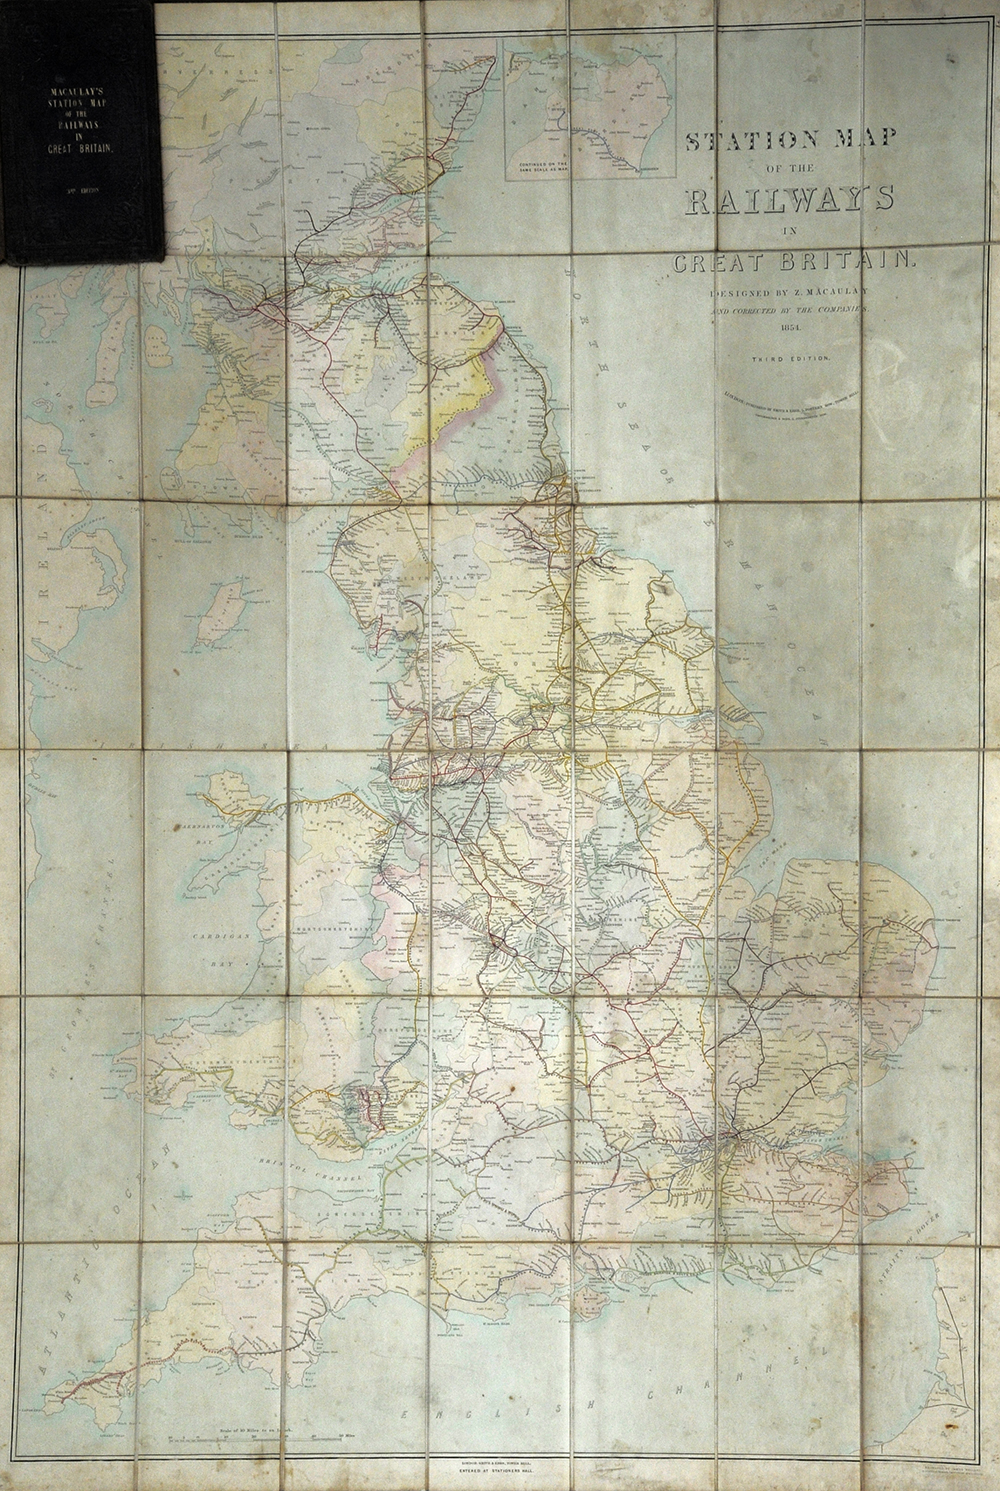 Third Edition of Macaulay's Station Map of the Railways in Great Britain, Published in 1854.